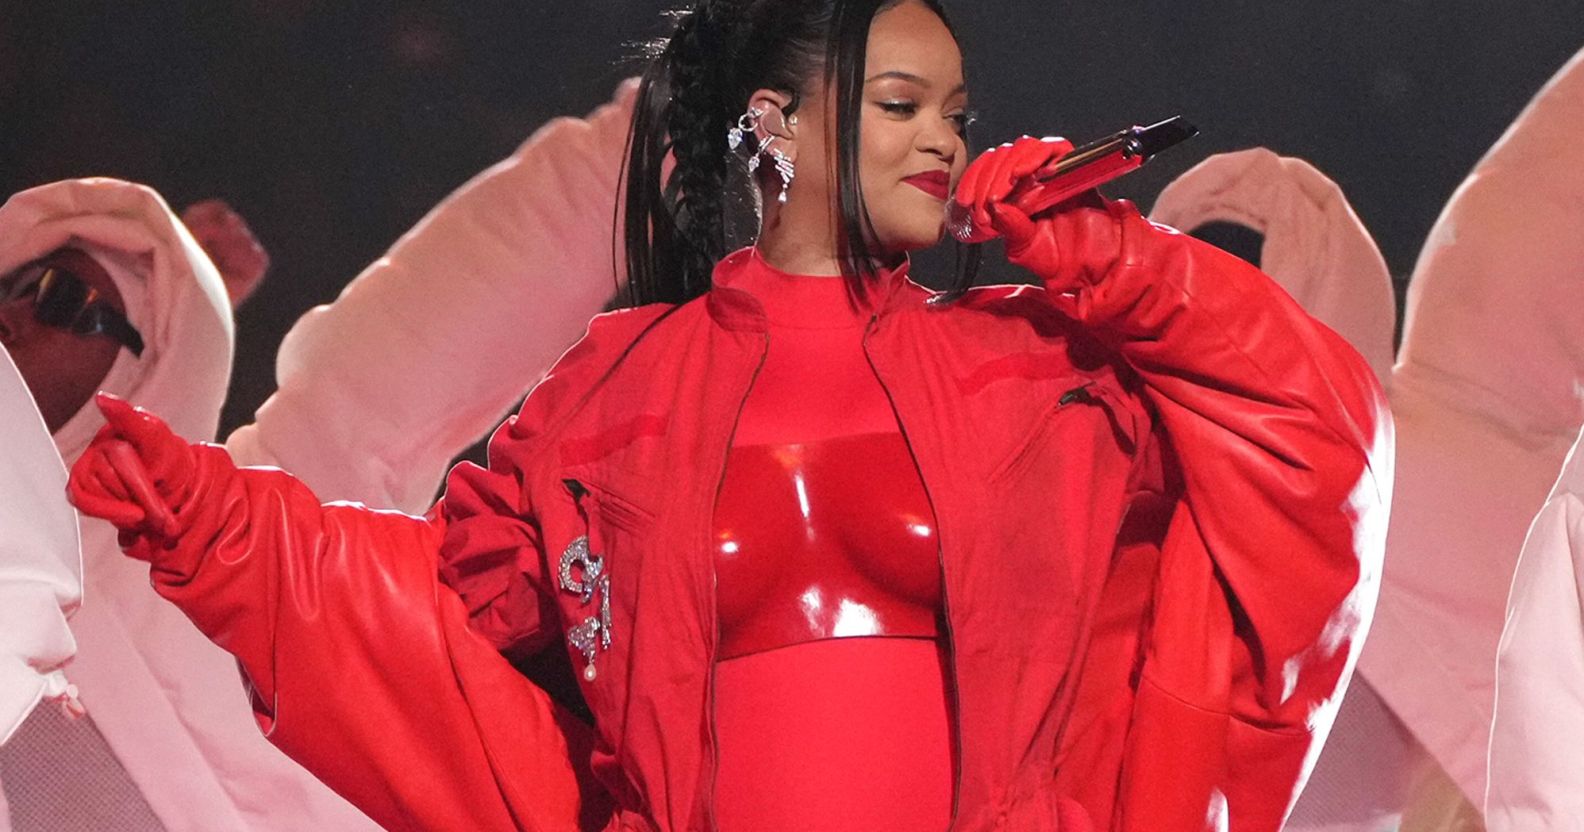 Rihanna in a full red outfit duruing the Super Bowl halftime show.